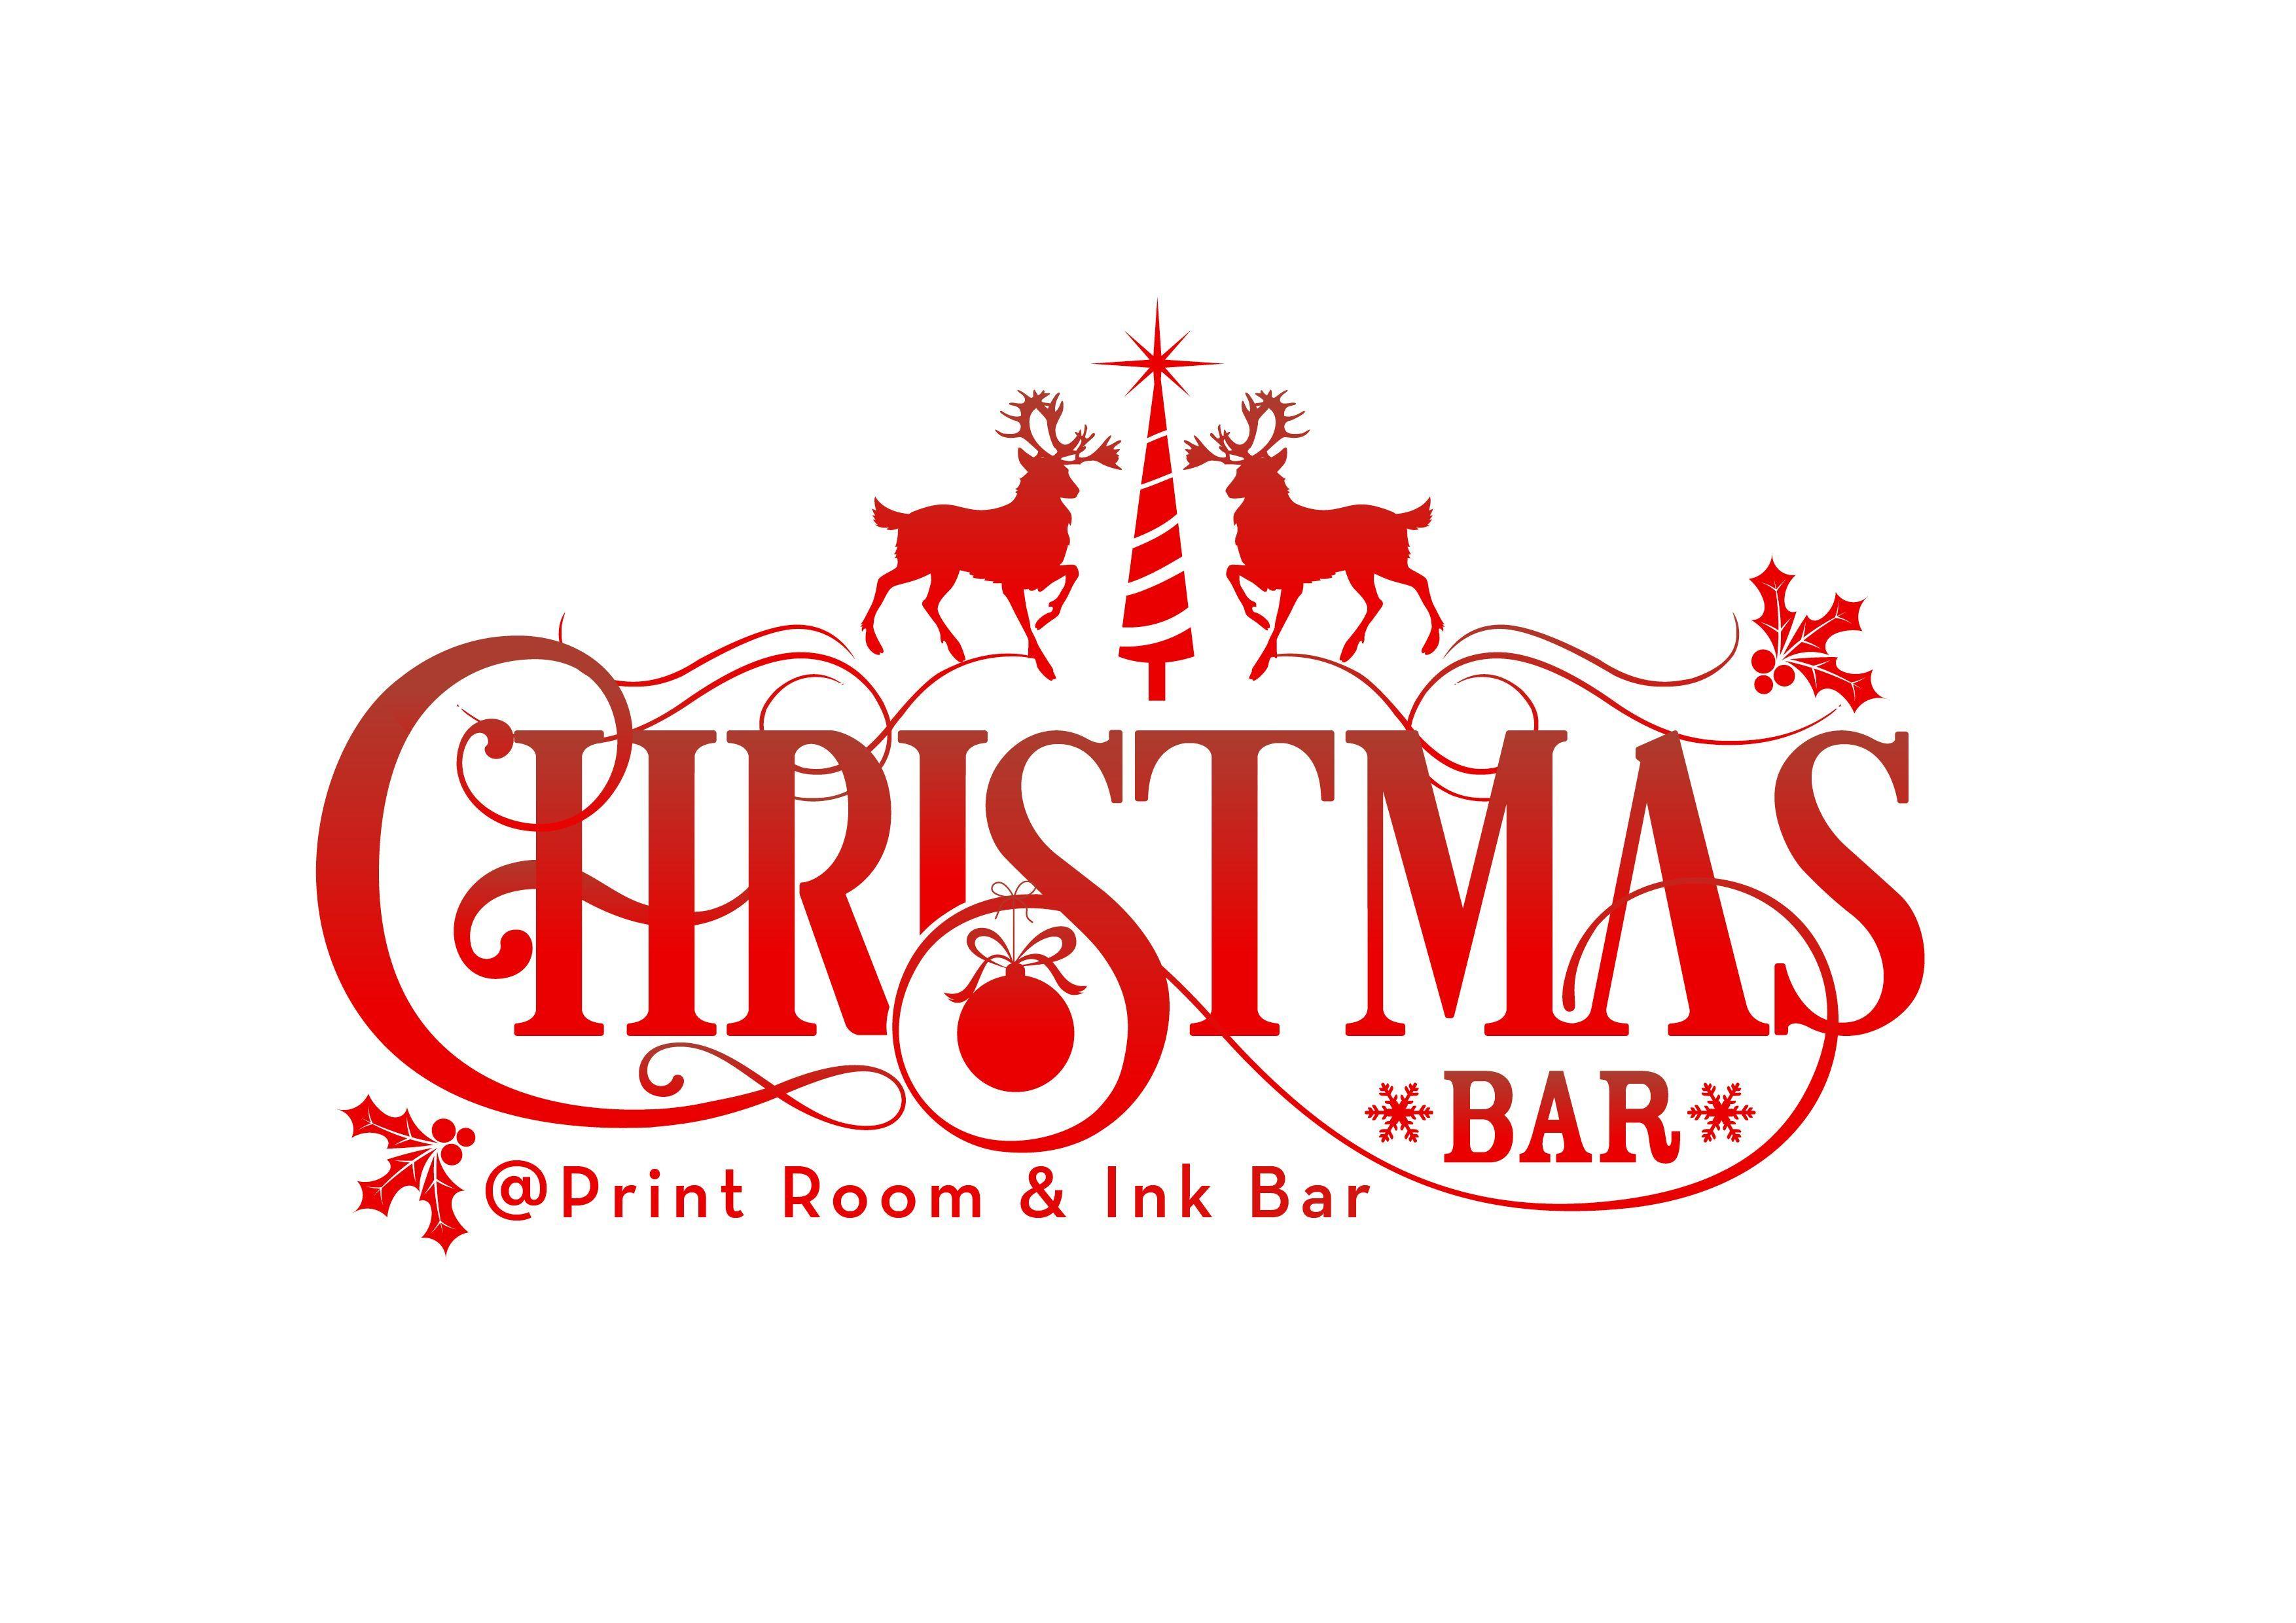 Red Open Bar Logo - Welcome to the Christmas Bar Bournemouth! | Seventa Events